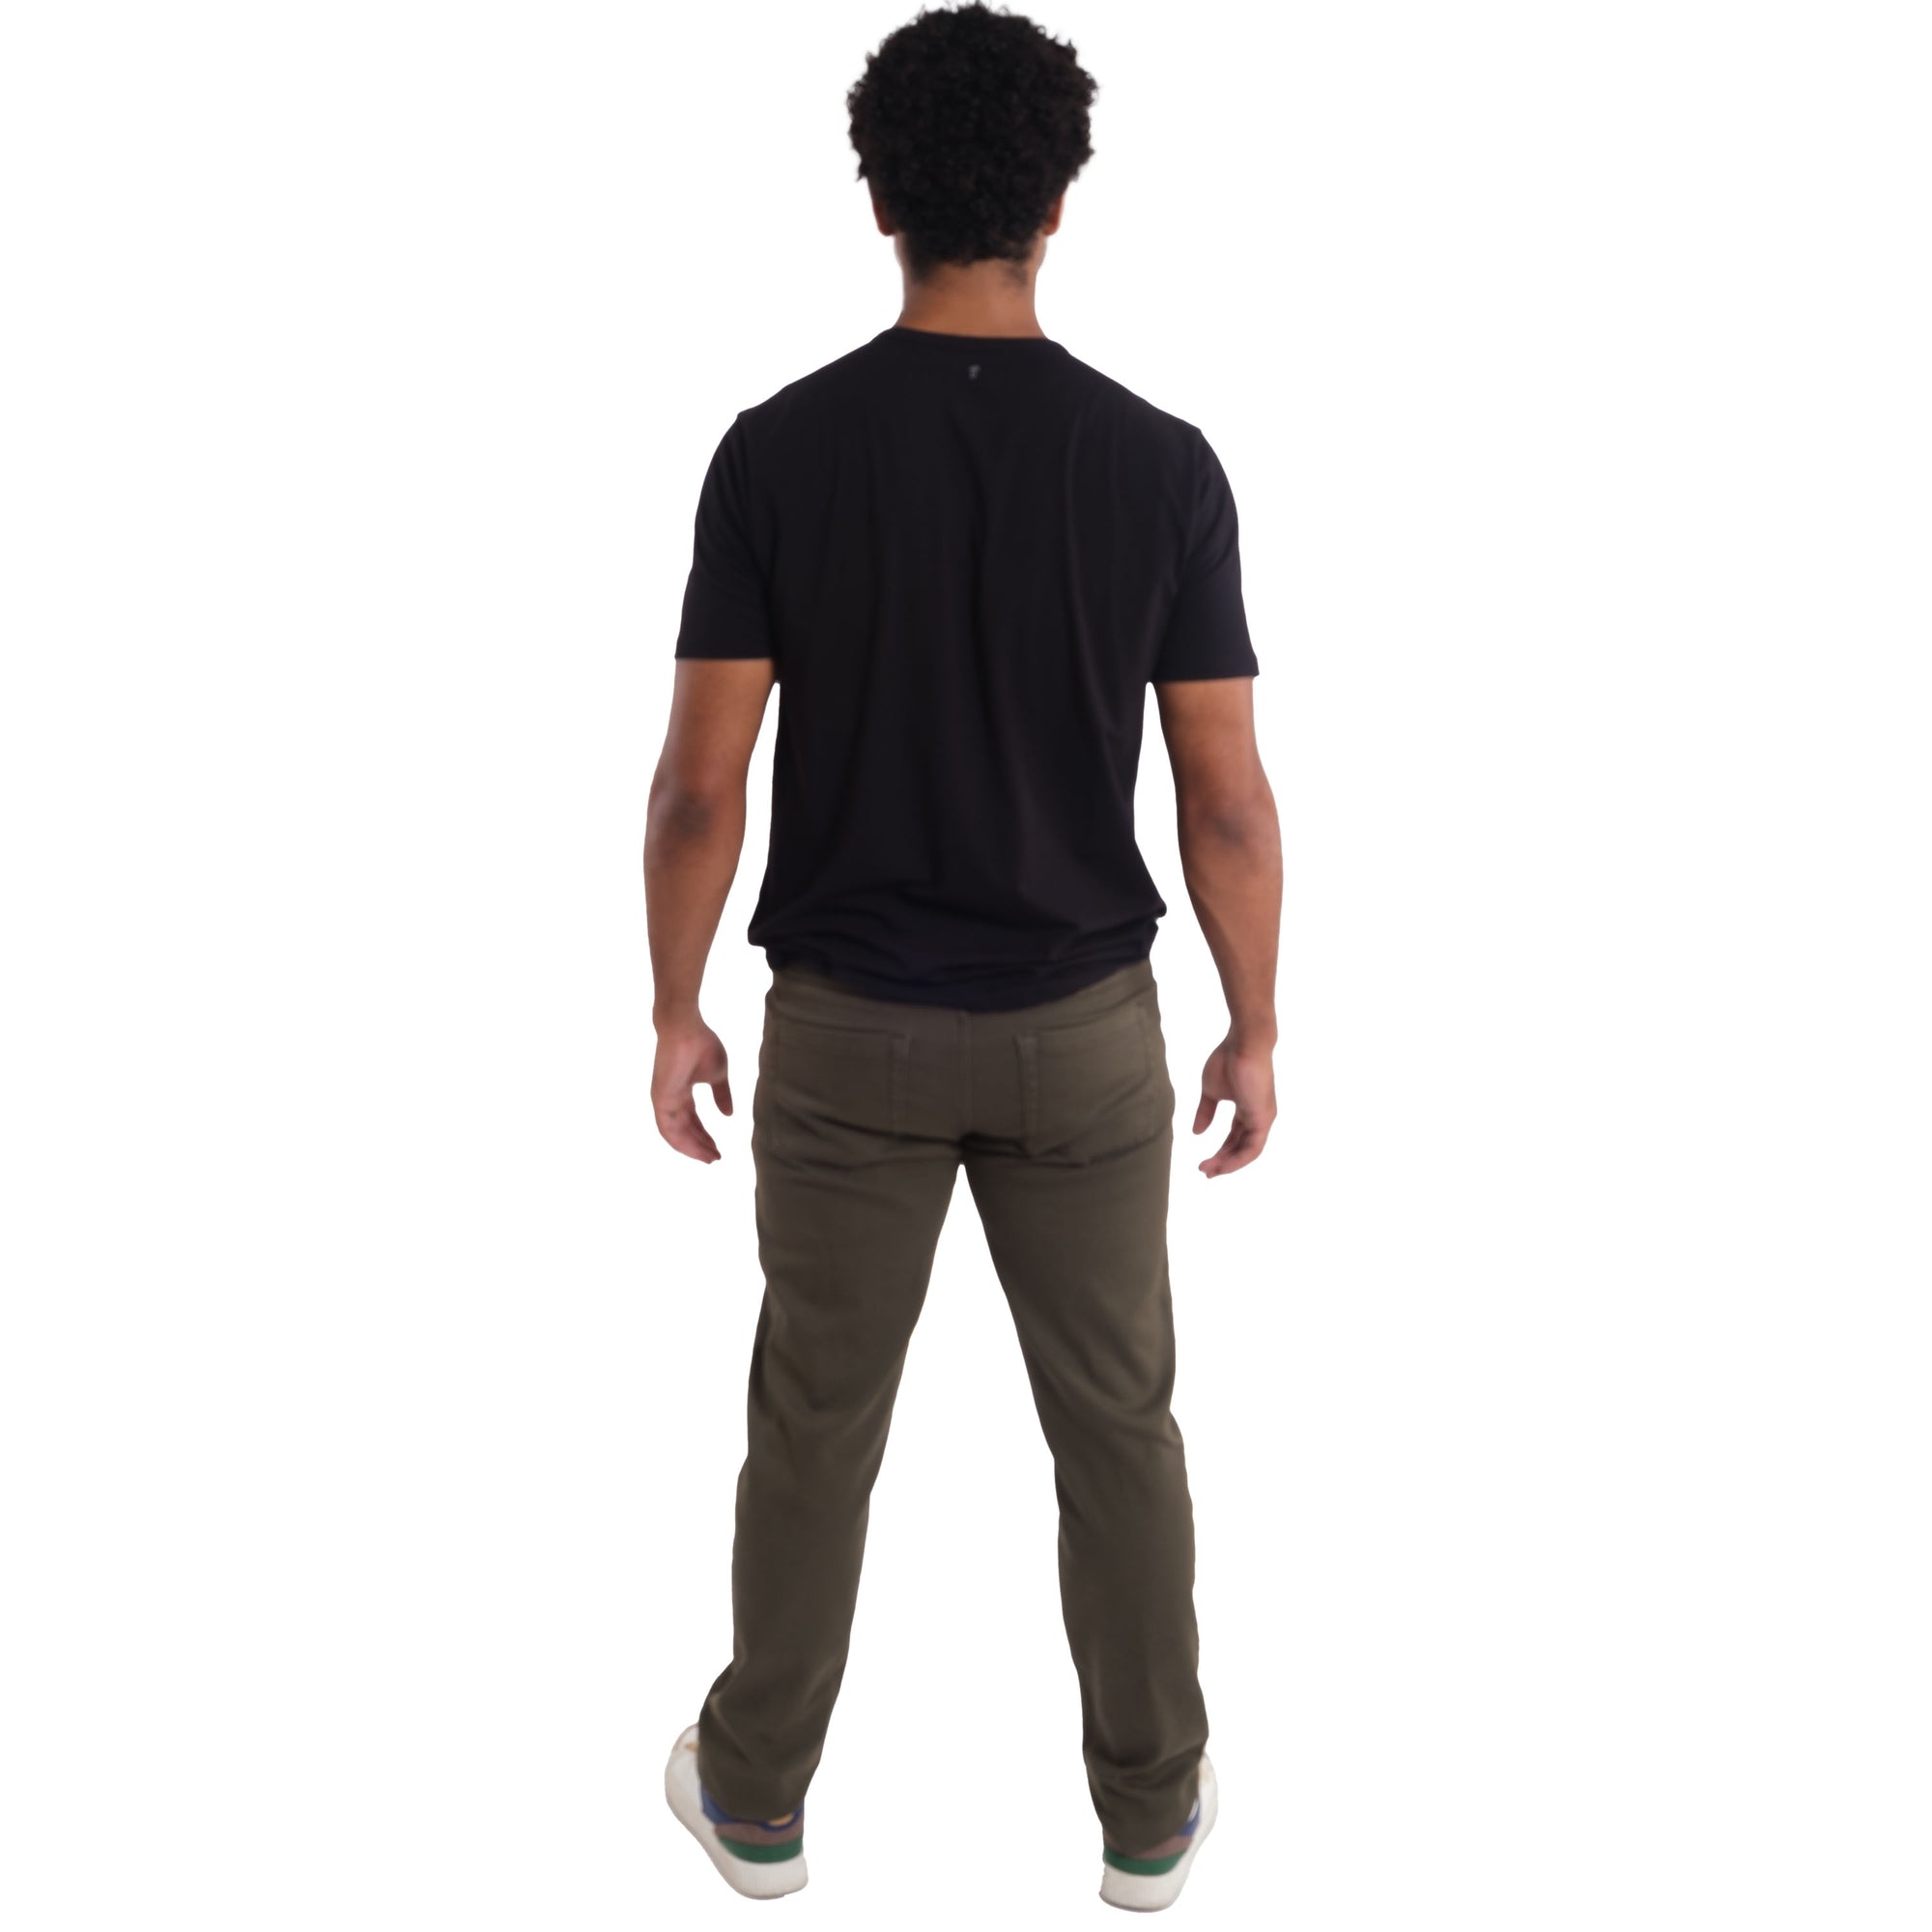 Athletic Fit / Denkhaki™ Soldier (Olive)